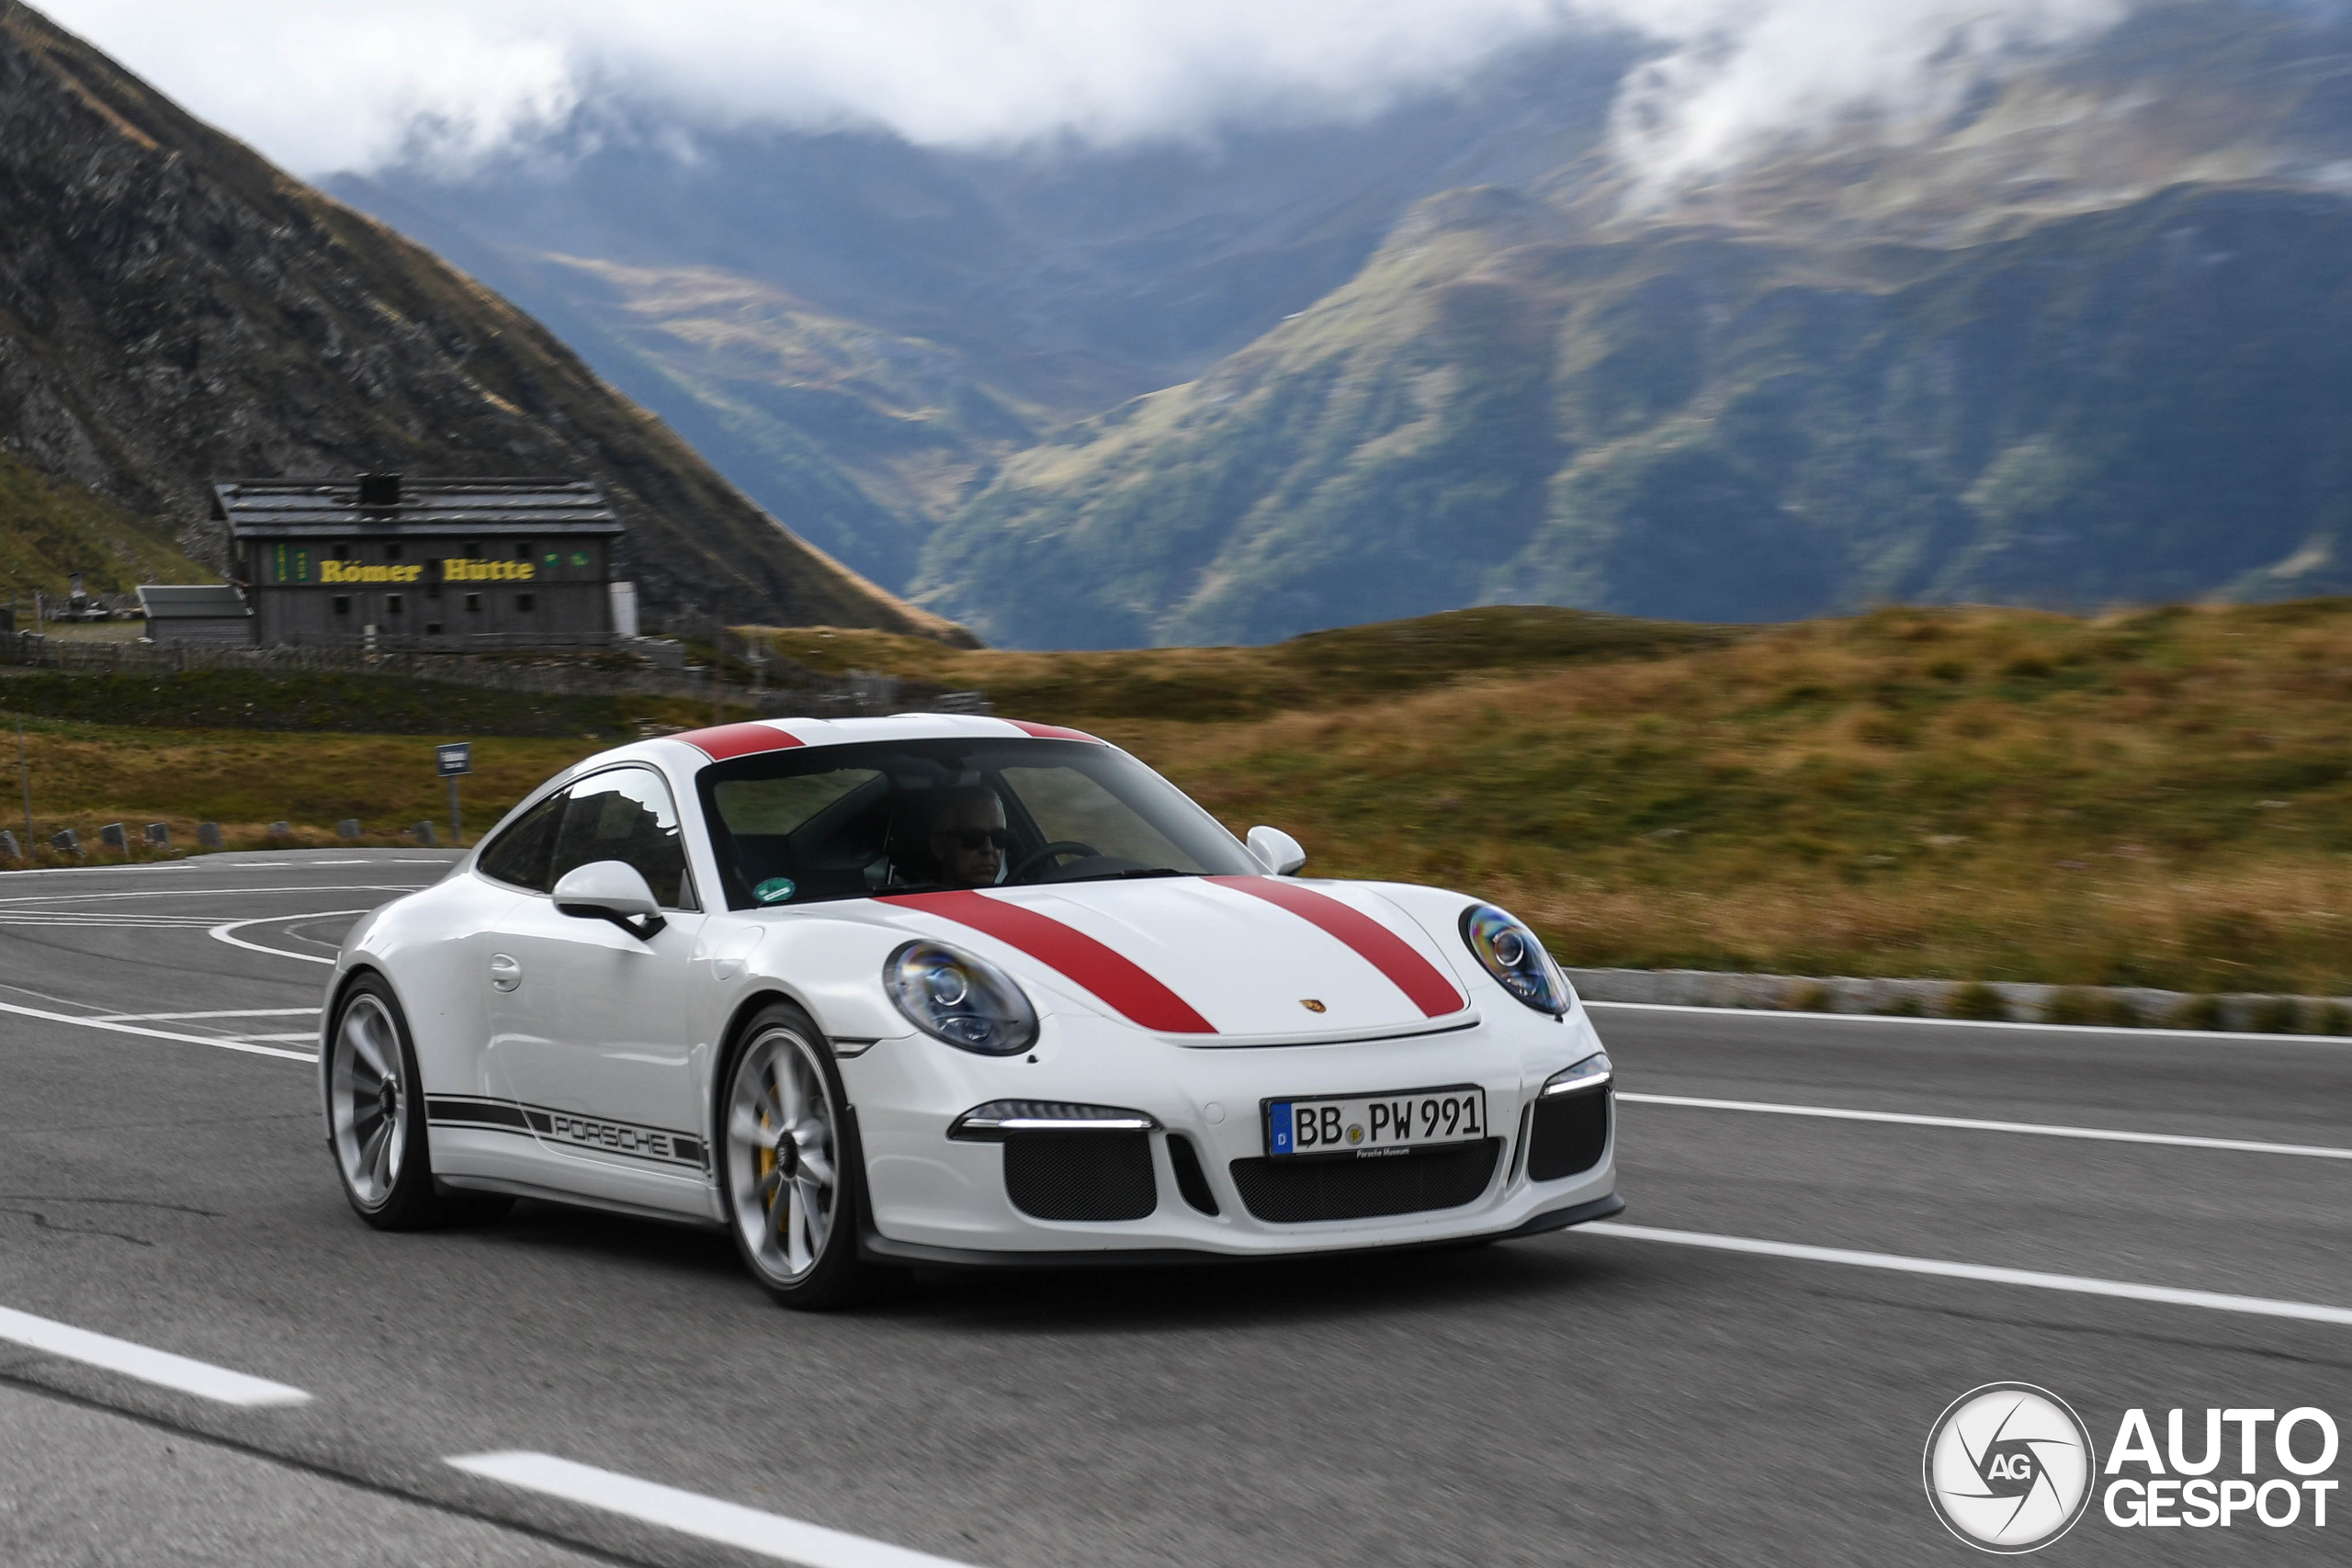 This Porsche 991 R is properly being used